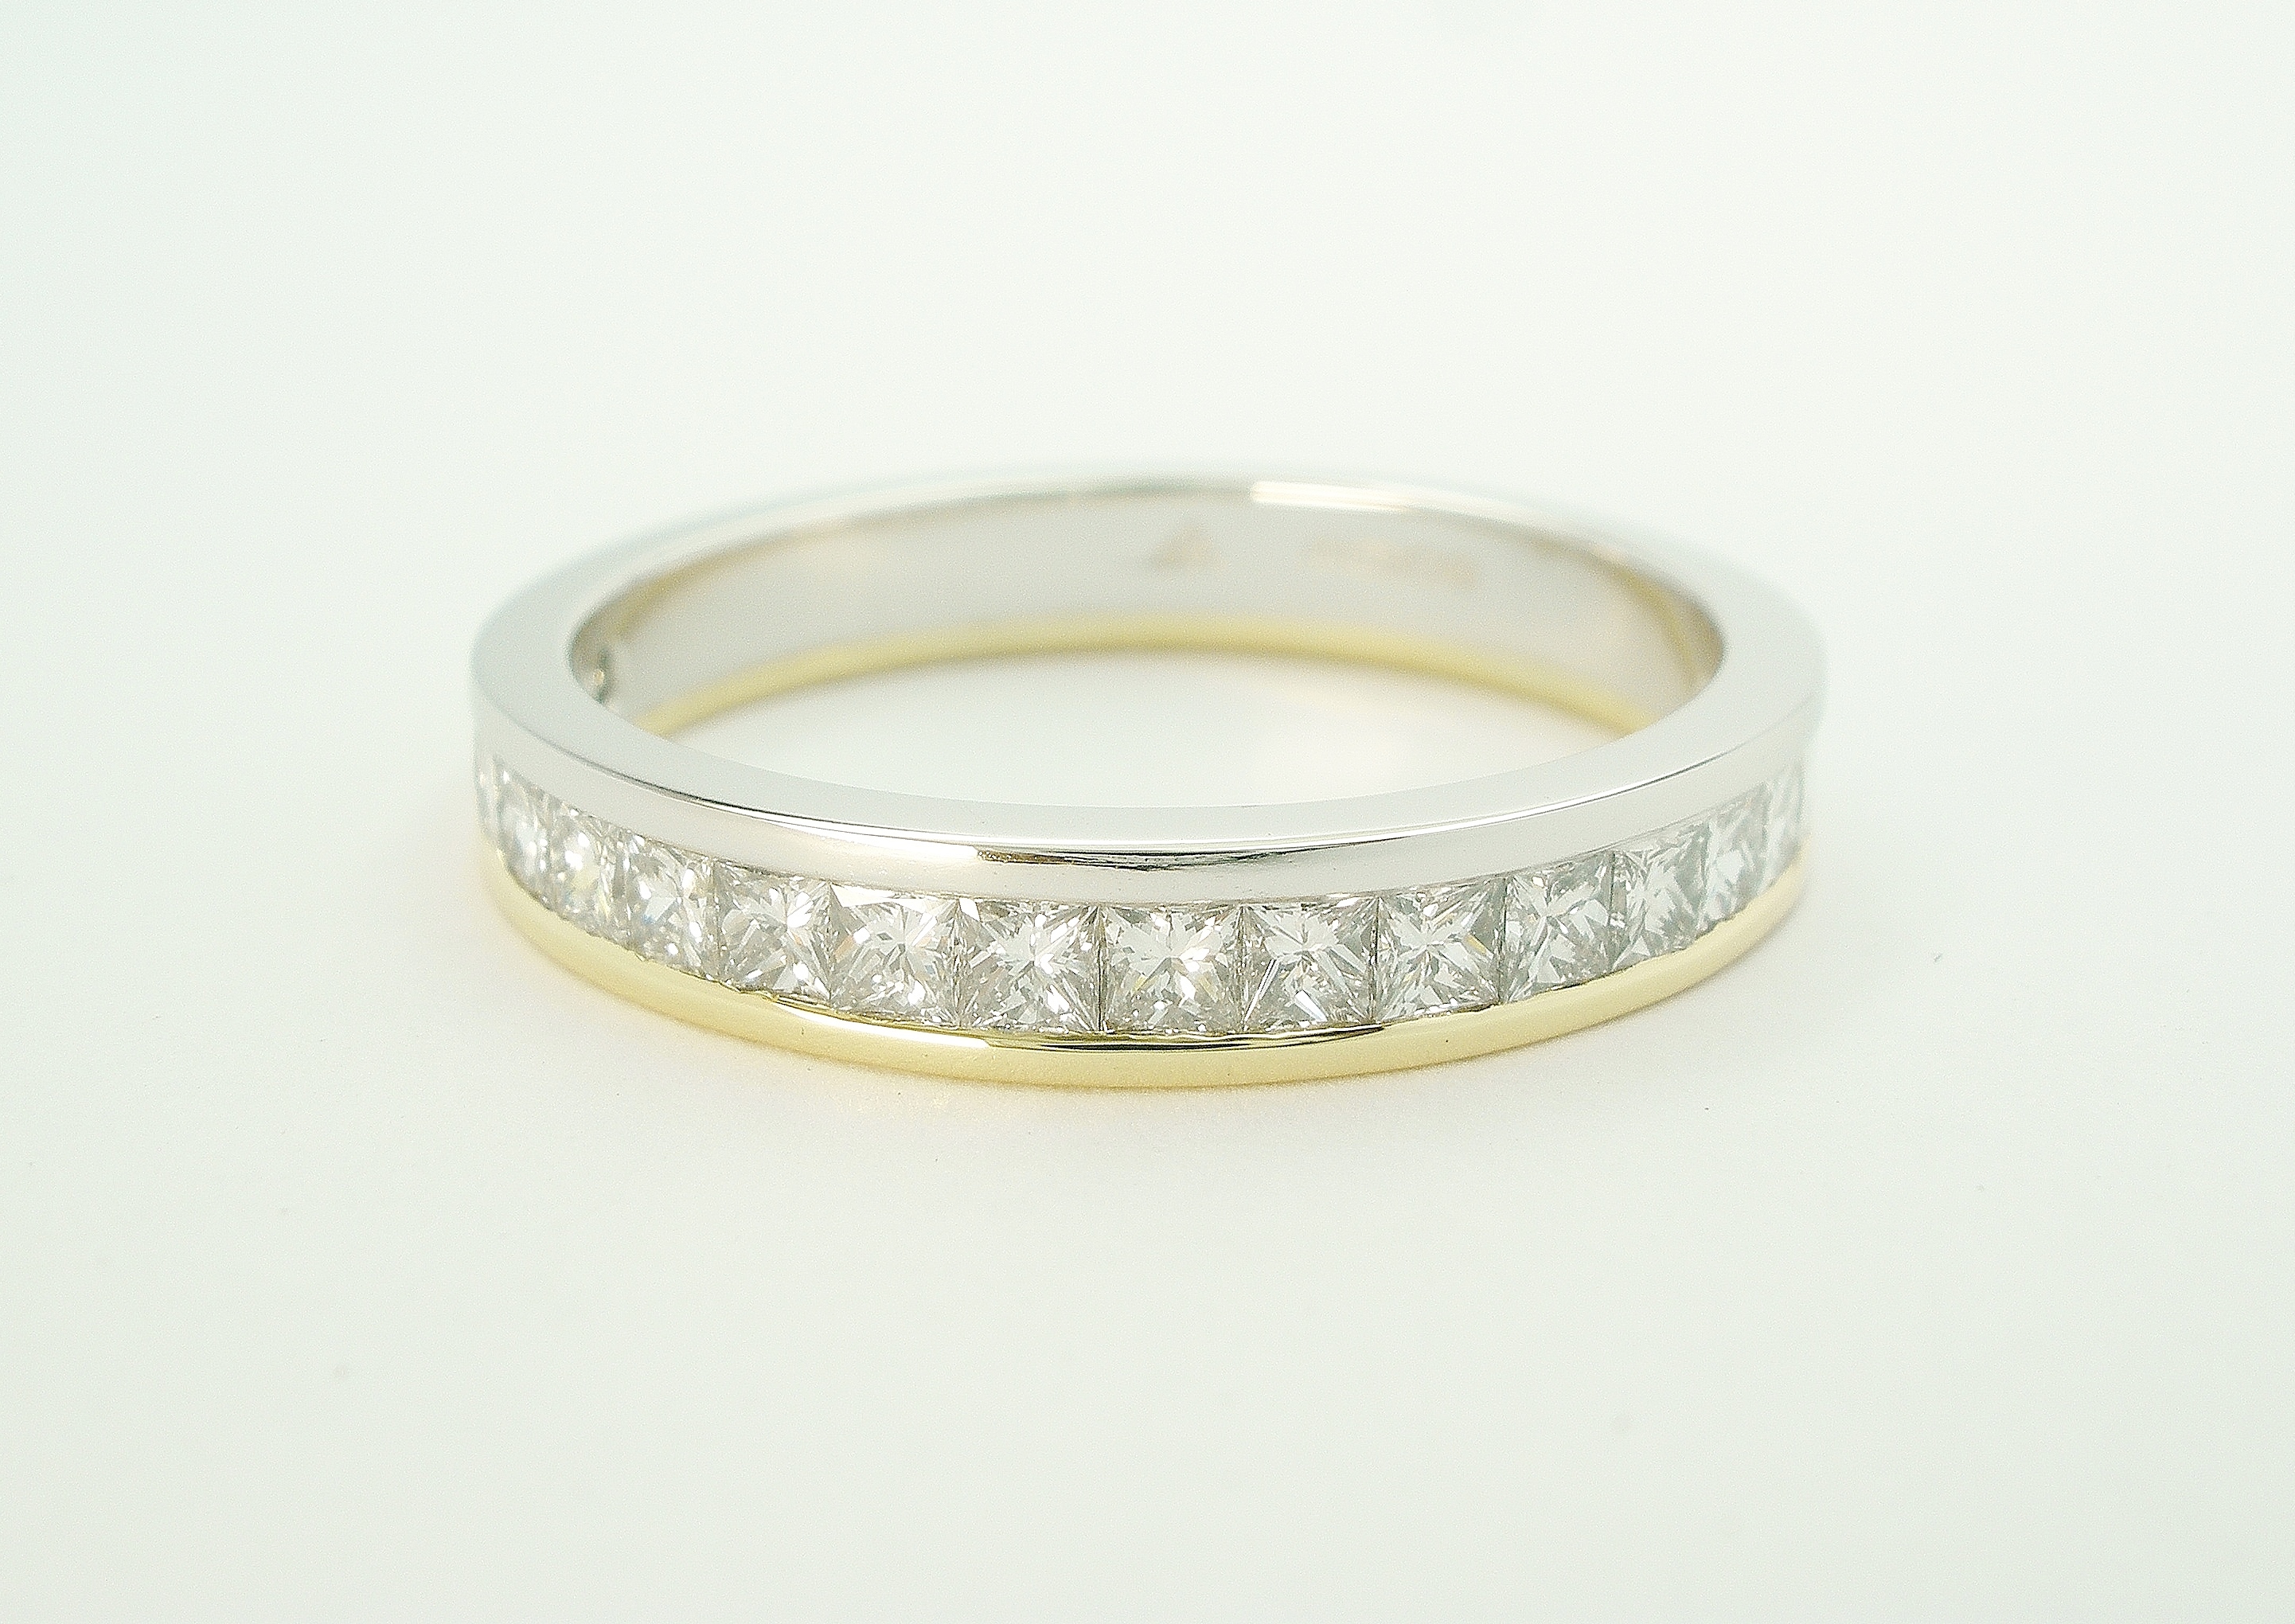 Princess cut diamond platinum & 18ct. yellow gold channel set wedding ring to 55% cover.